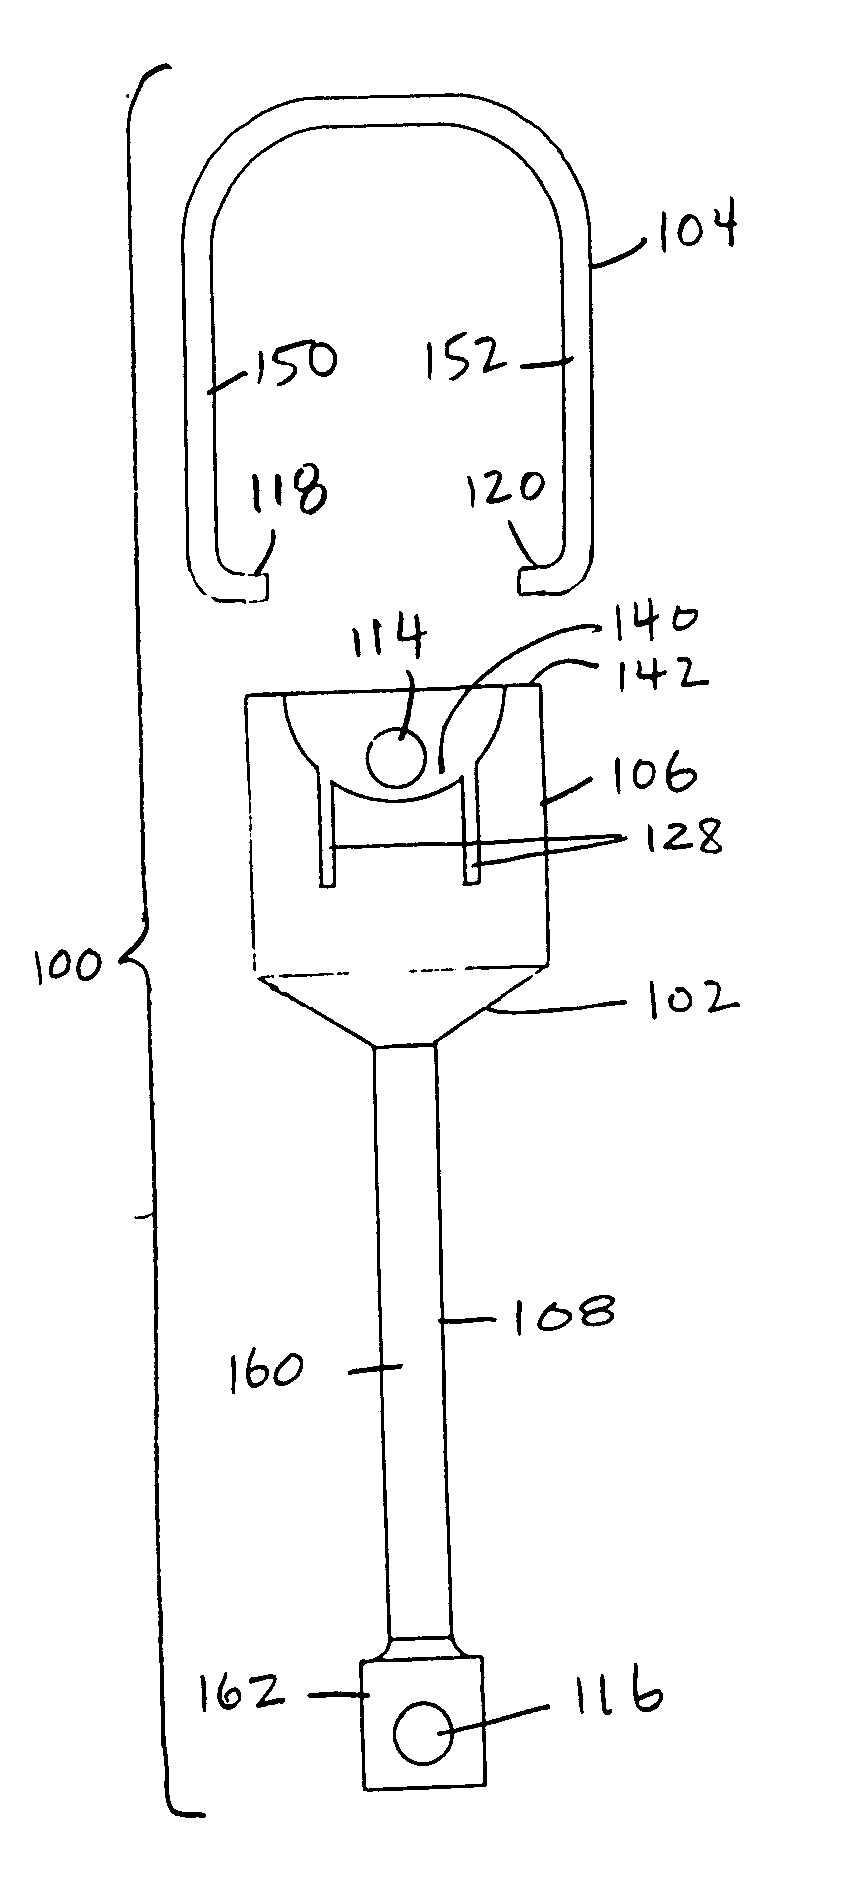 Stapedial prosthesis and method of implanting the same